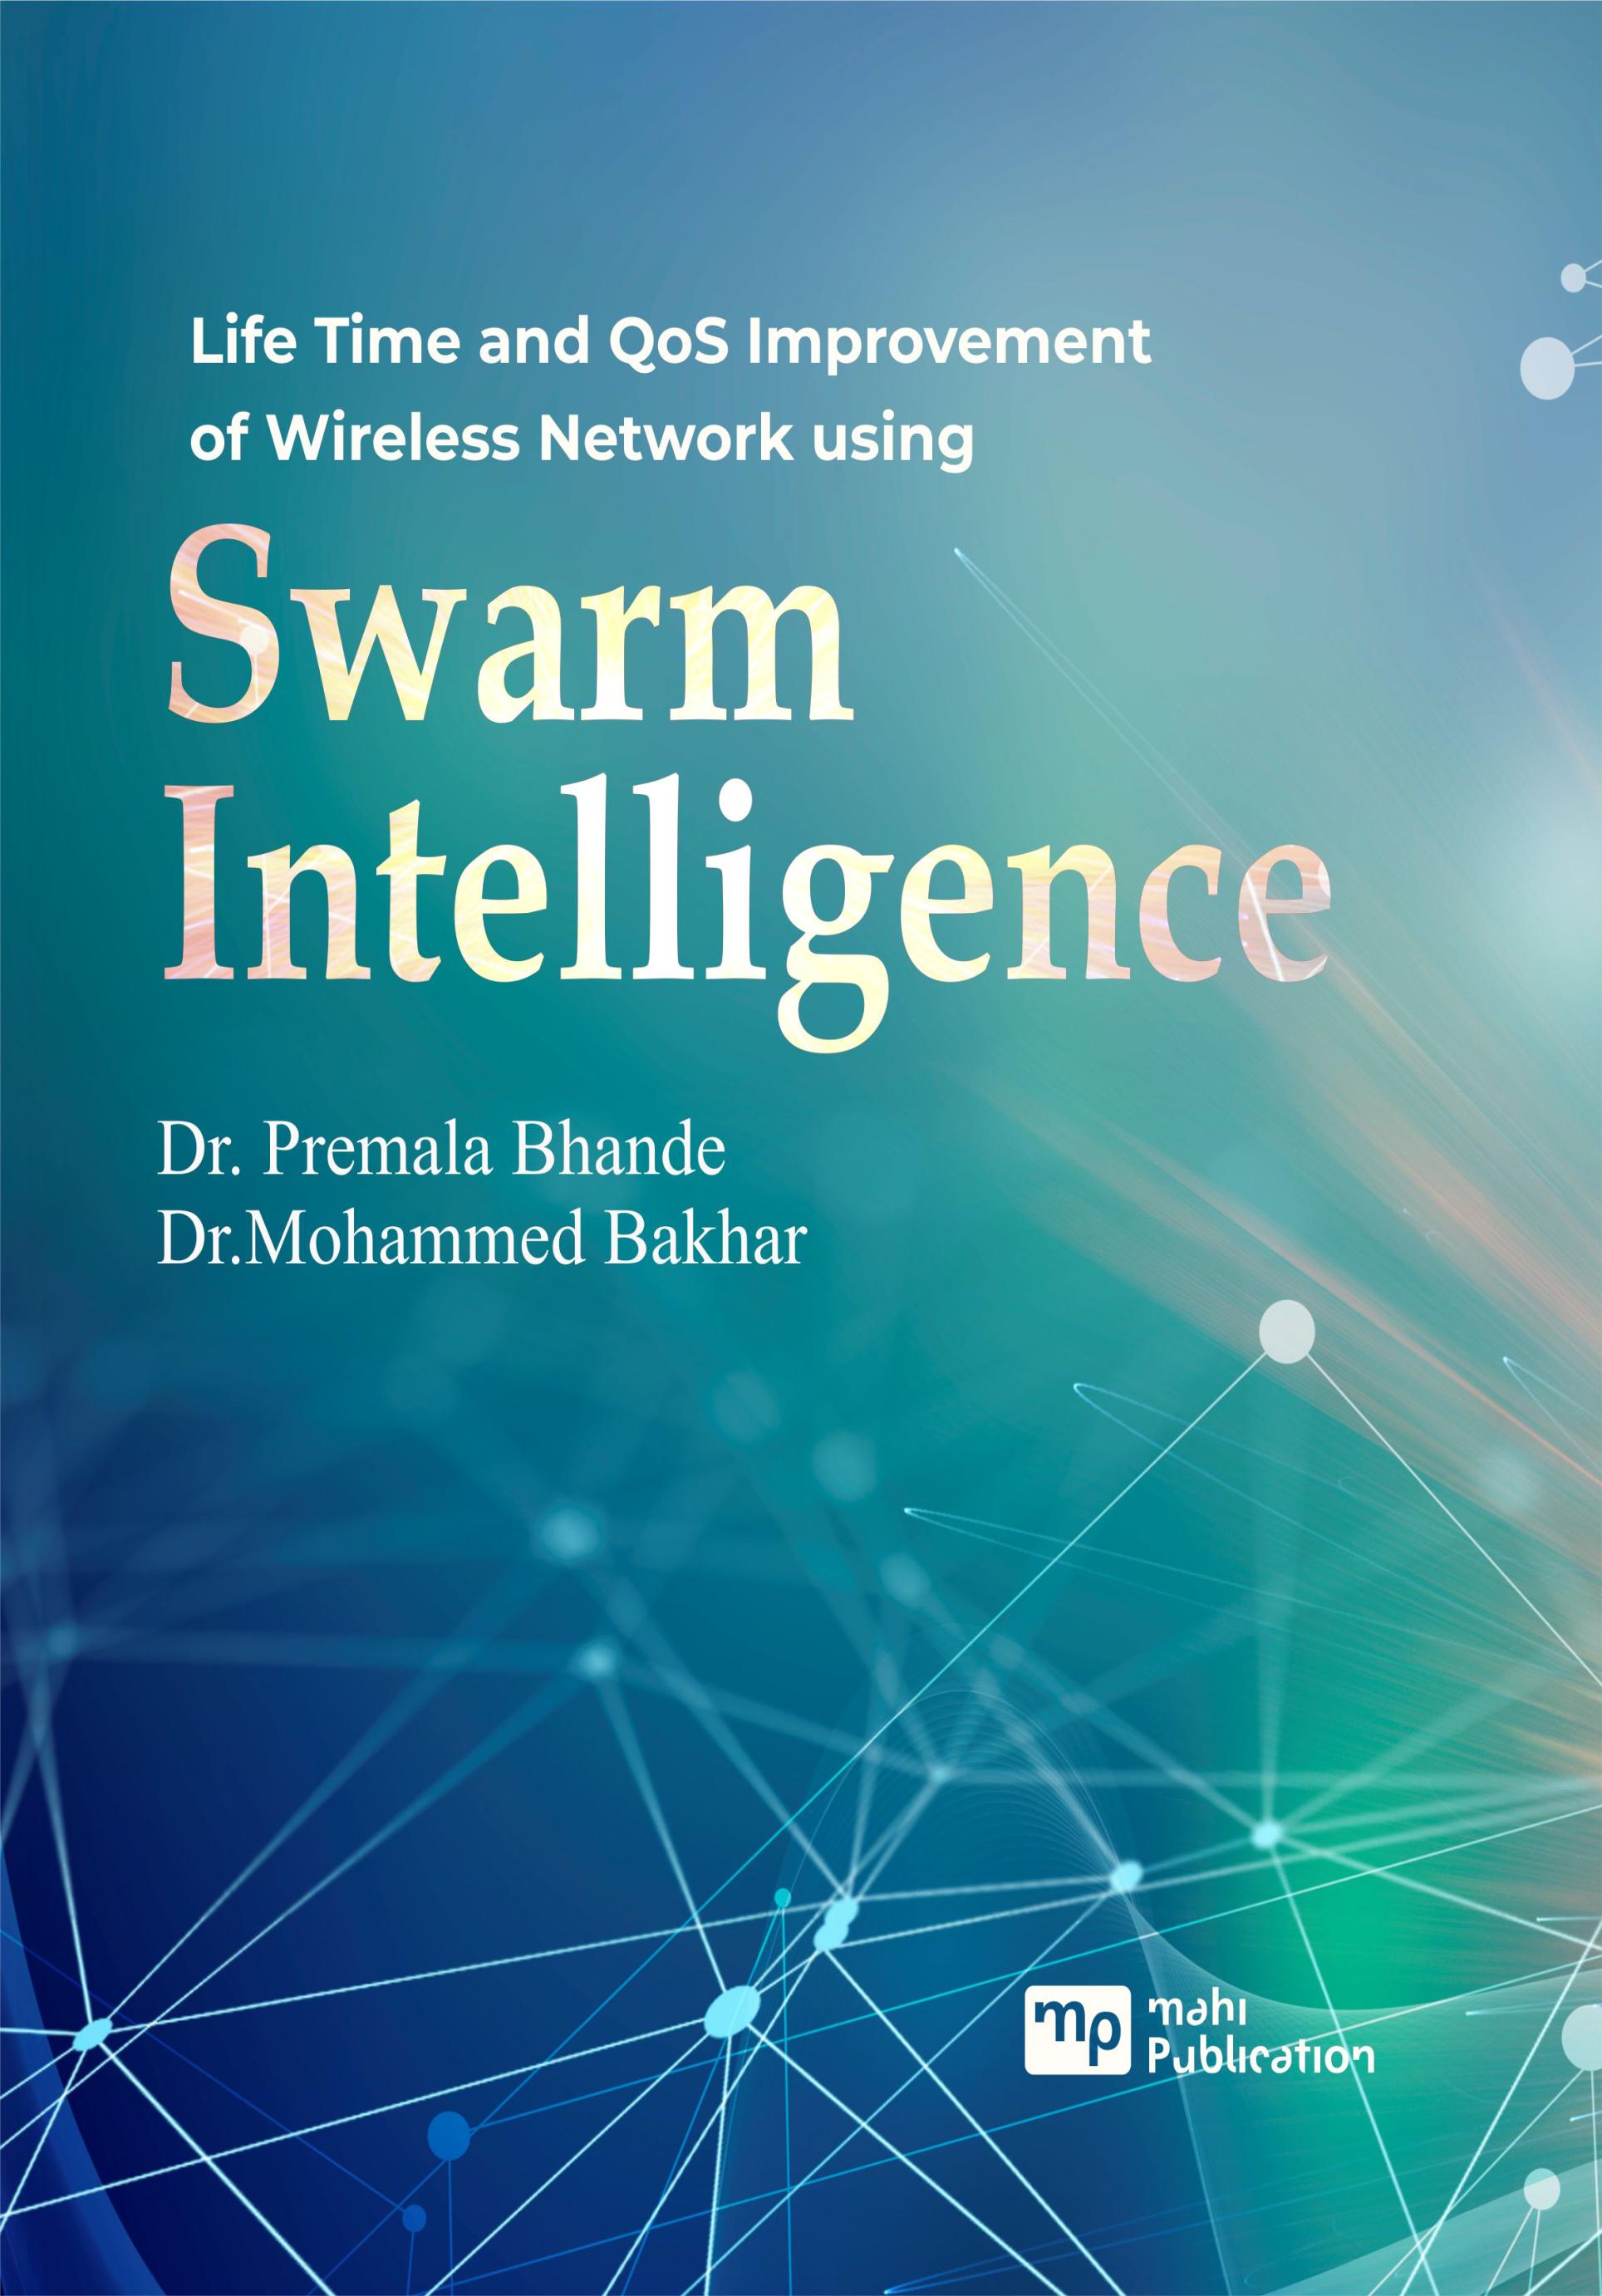 Life Time And Qos Improvement Of Wireless Network Using Swarm Intelligence